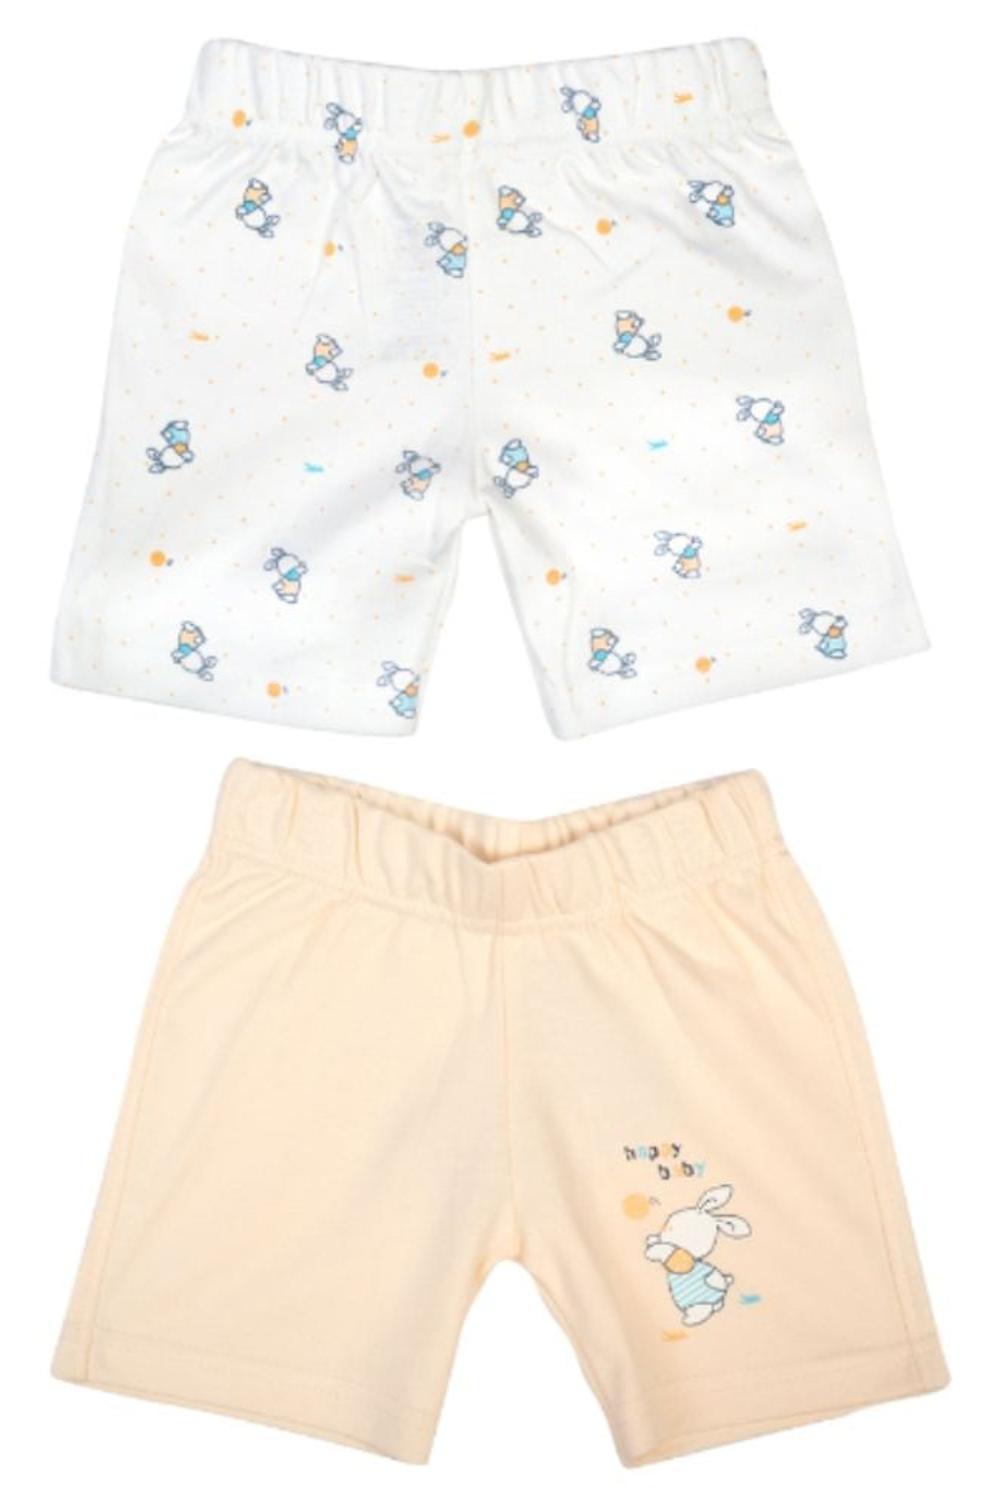 Mee Mee Baby White Peach Bunny Print Shorts - Pack Of 2